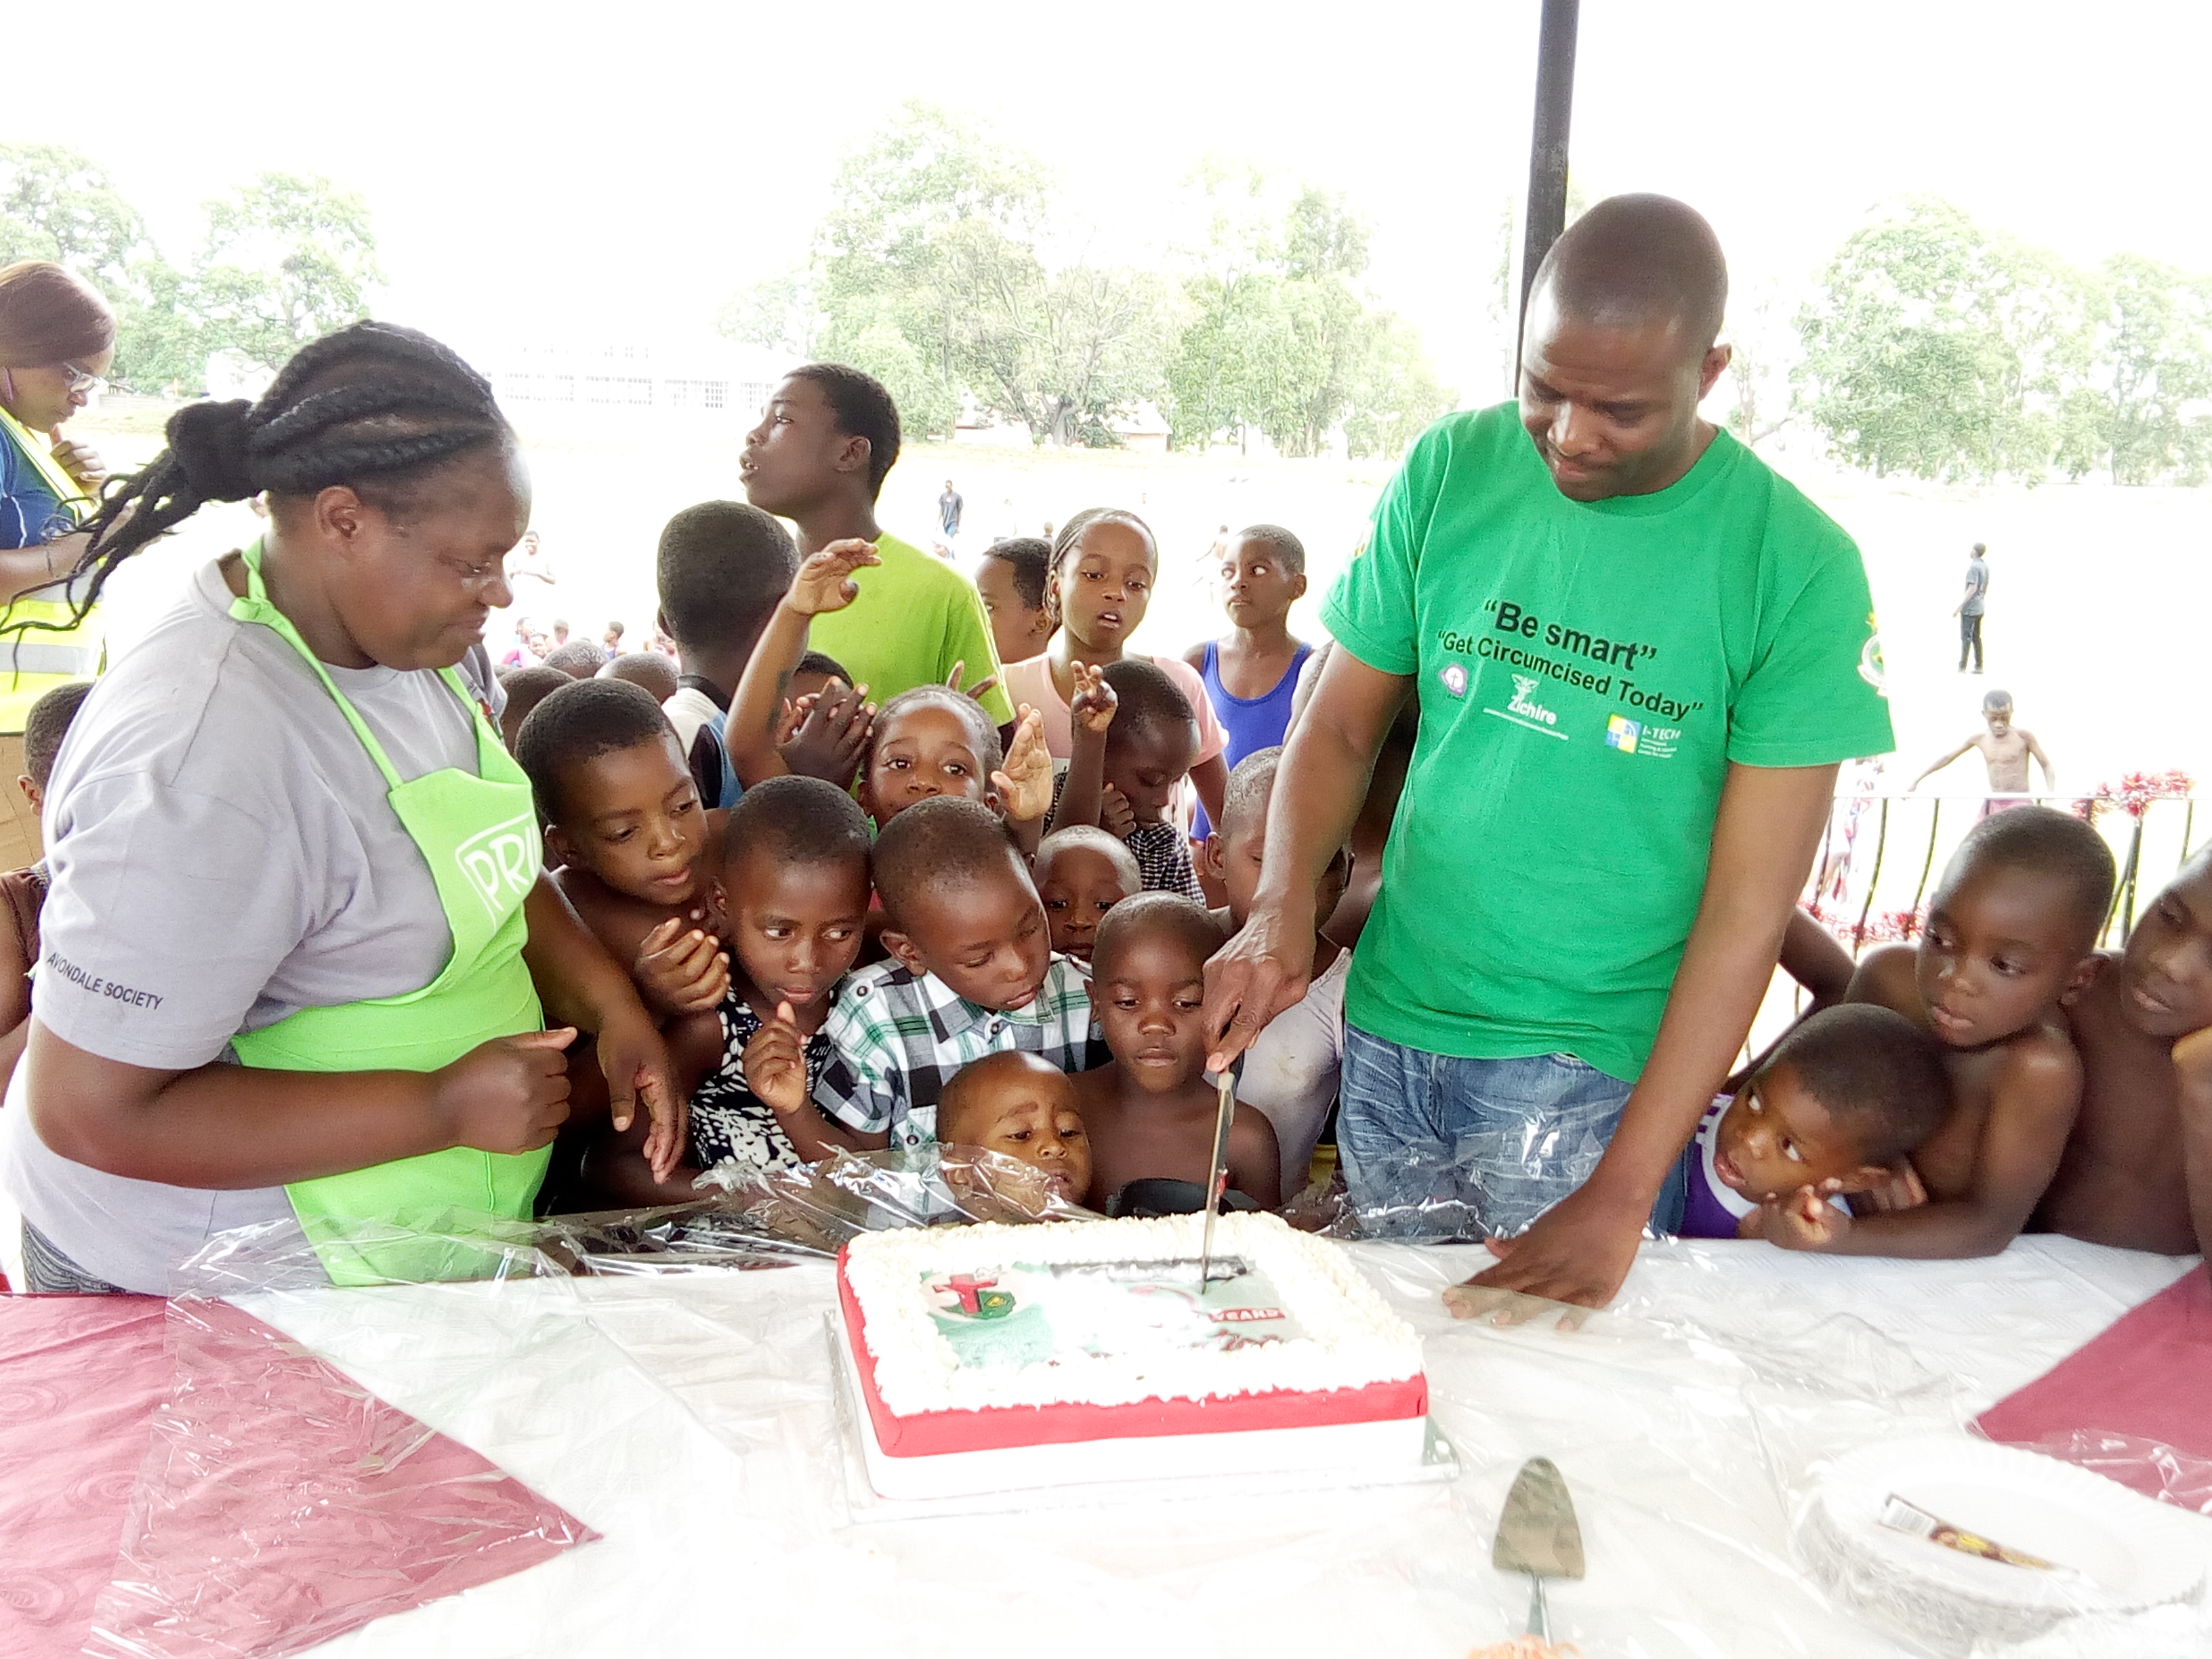 Small children gather for the treat of a piece of celebration cake